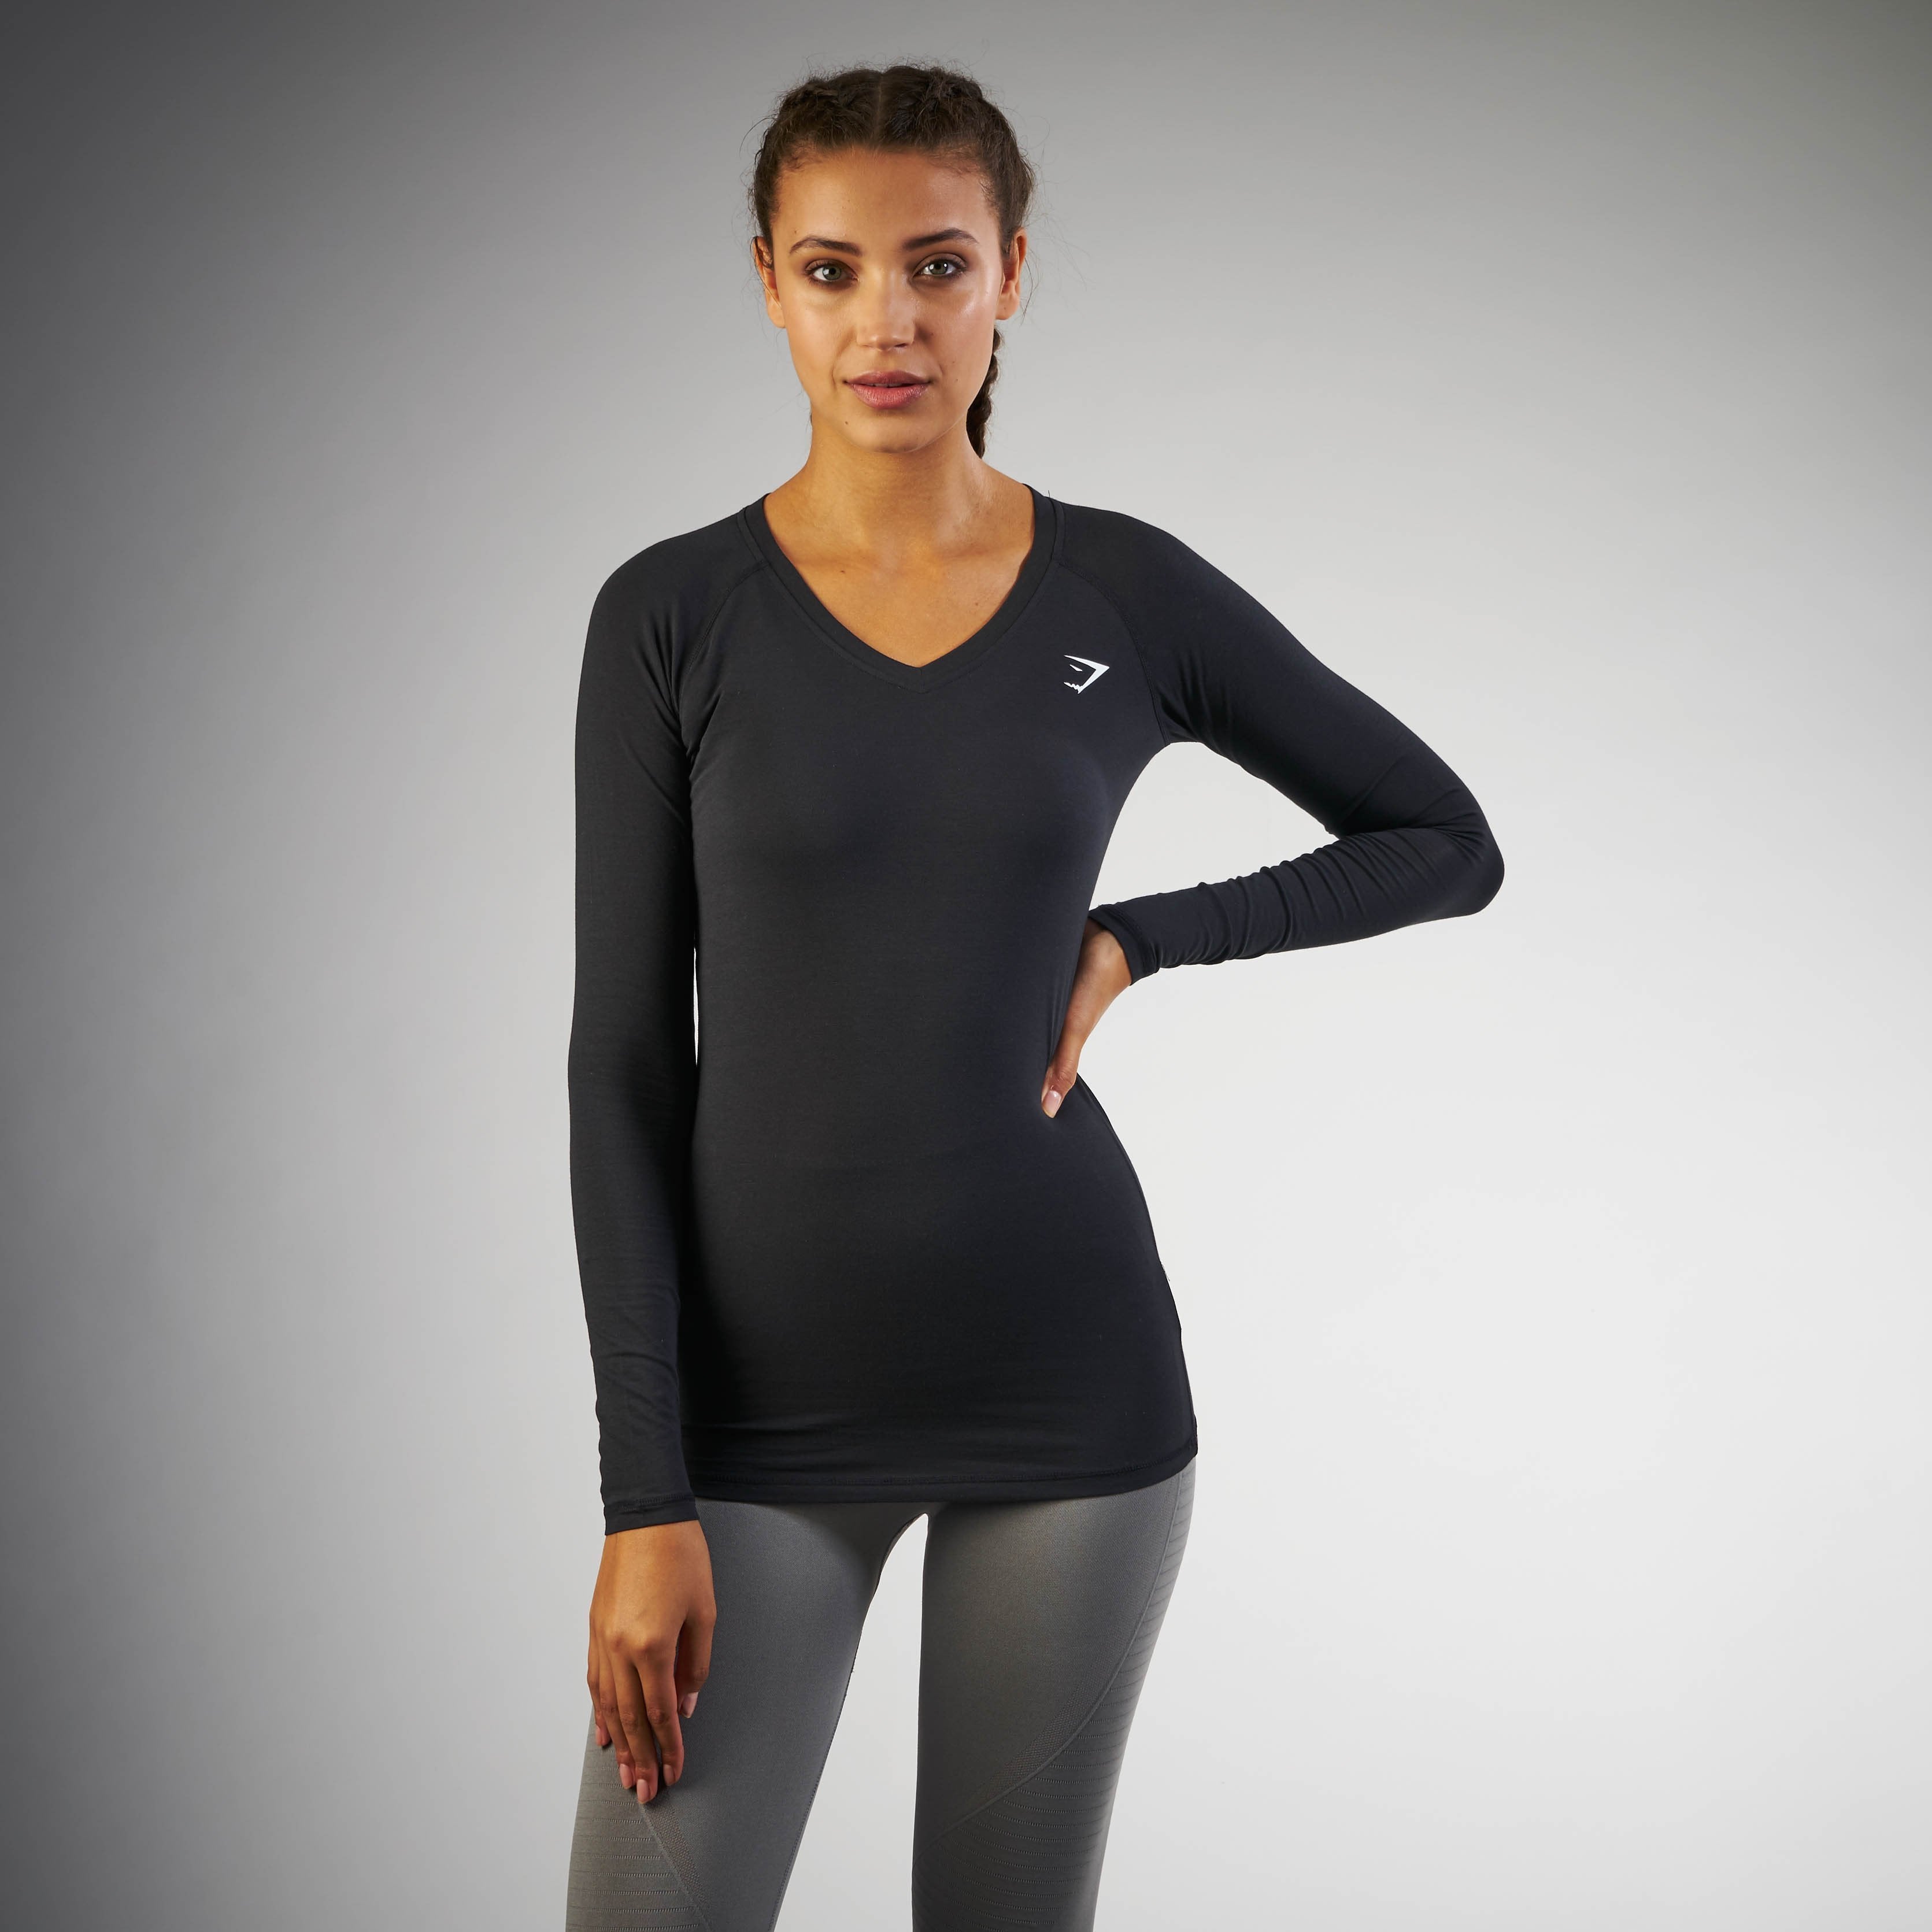 Verve Long Sleeve T-Shirt in Black - view 4